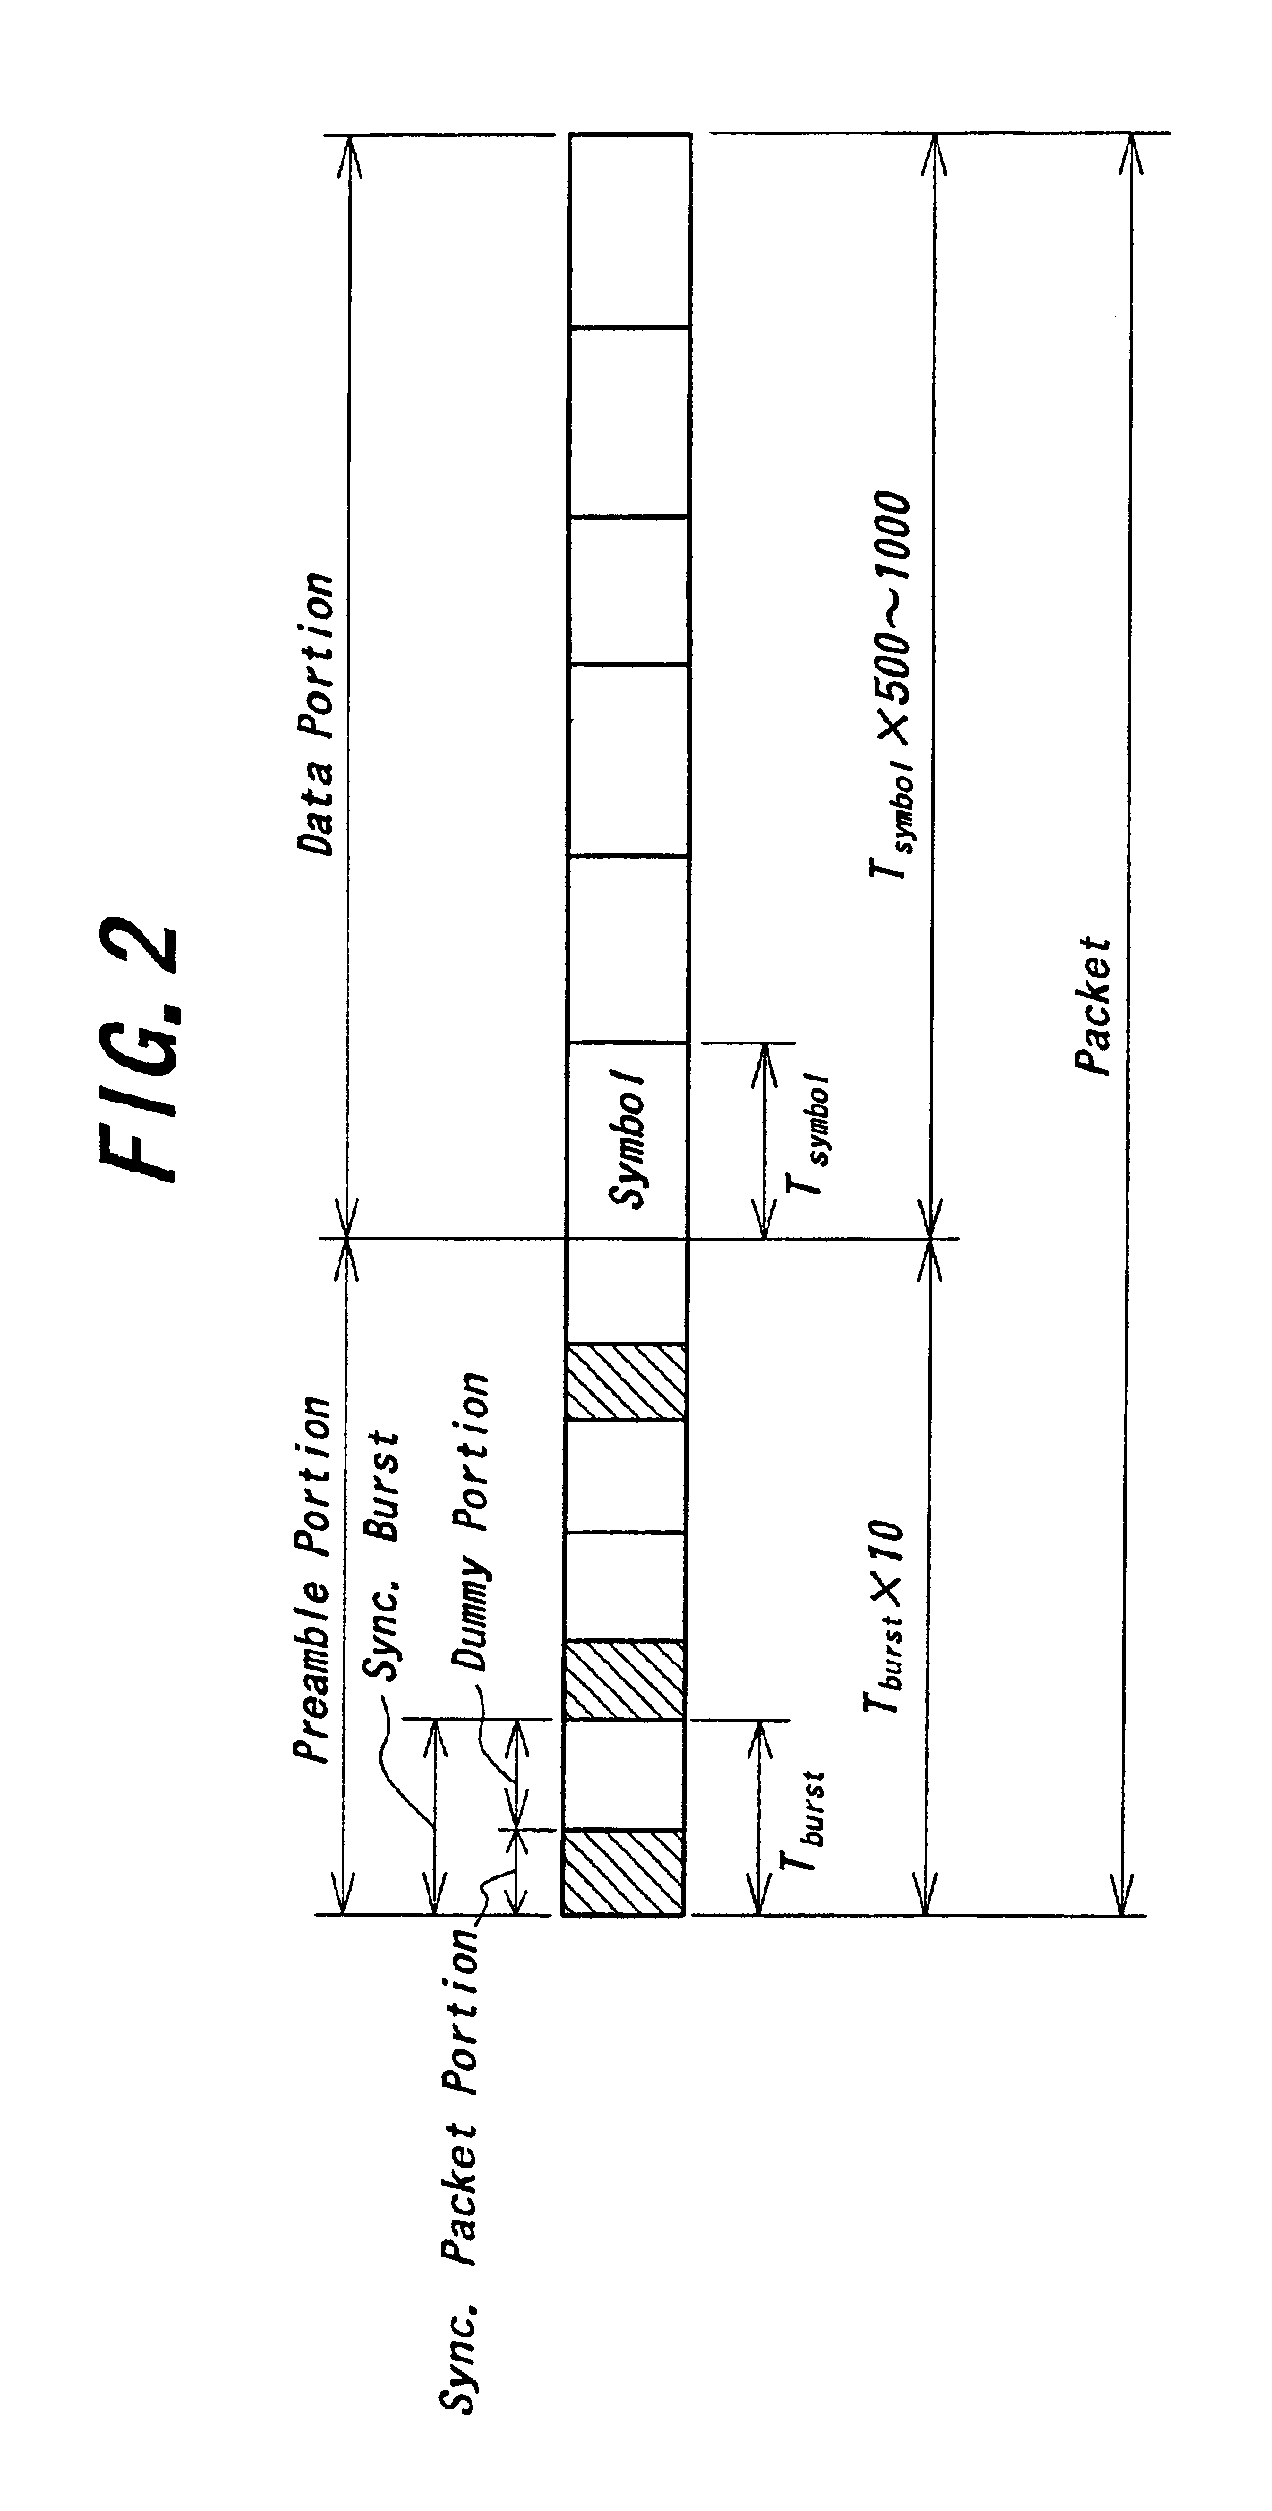 Code division multiple access communication system